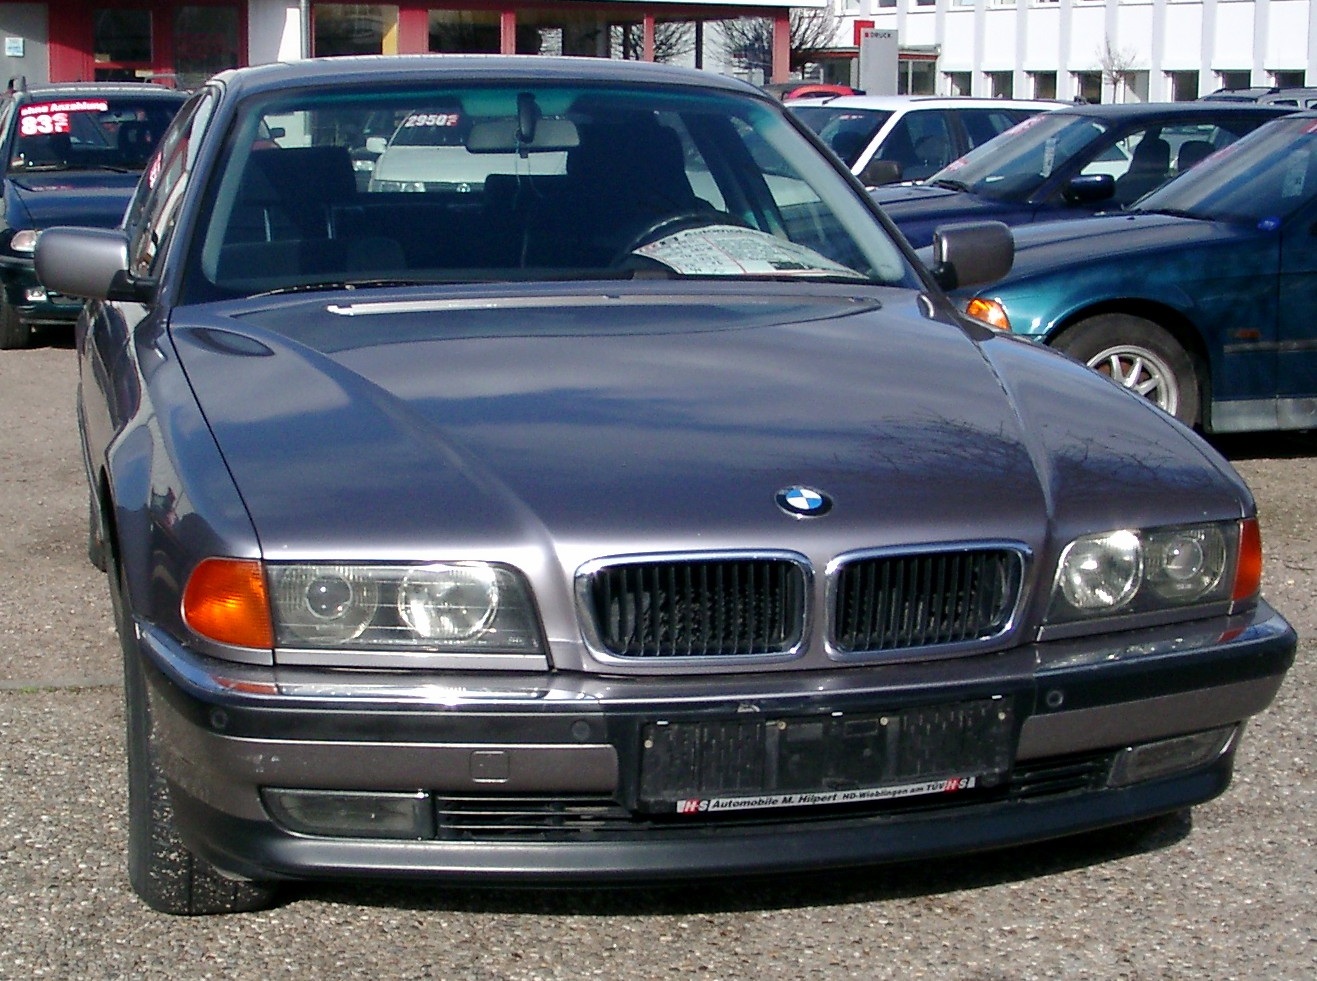 File:BMW 740i front.JPG - Wikimedia Commons